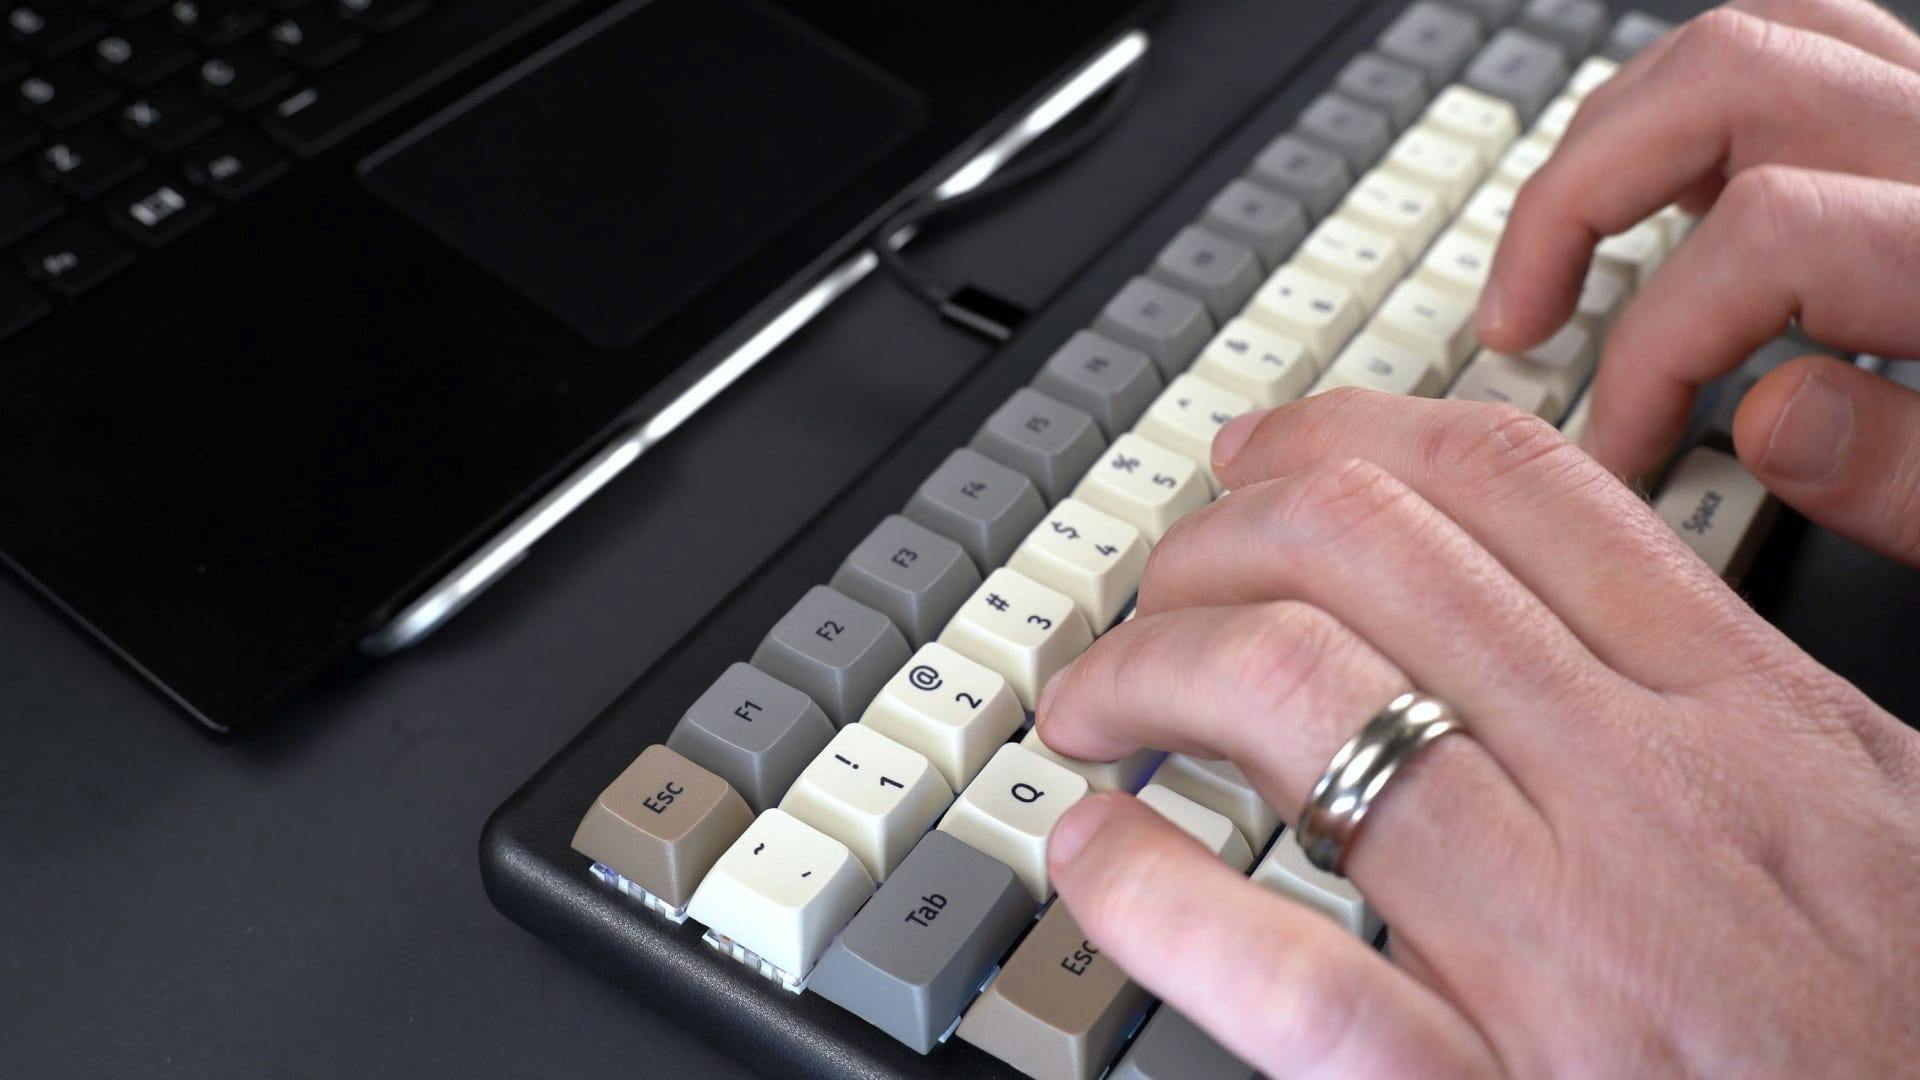 A person typing on the keyboard that is plugged into the laptop.